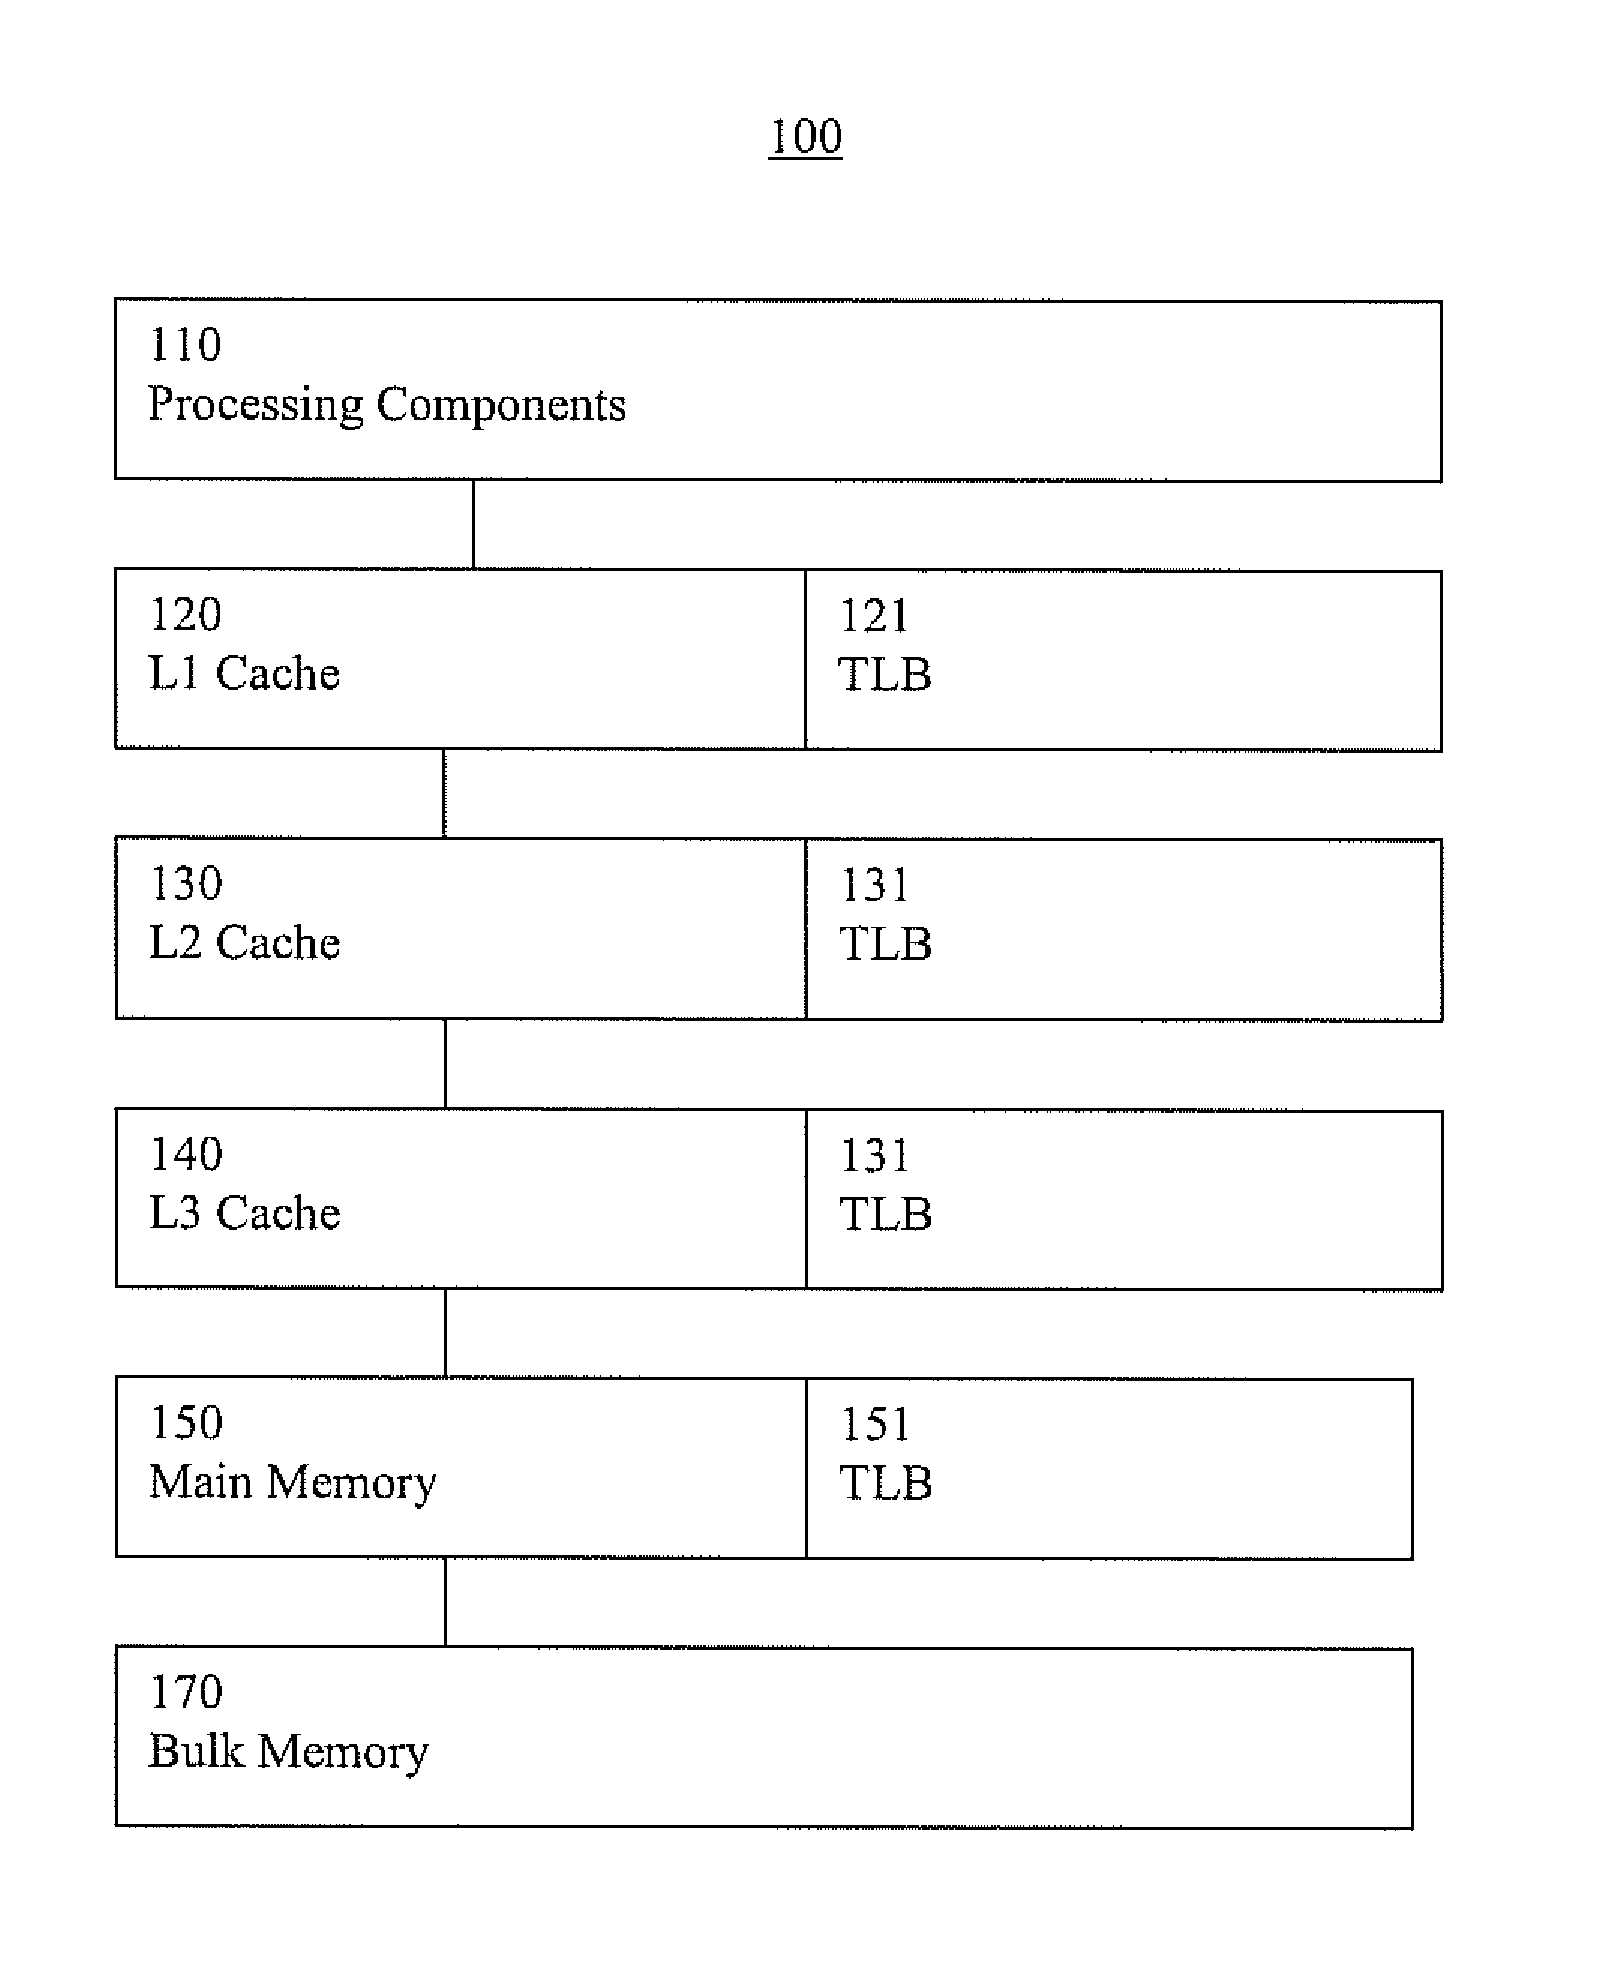 Translation lookaside buffer entry systems and methods